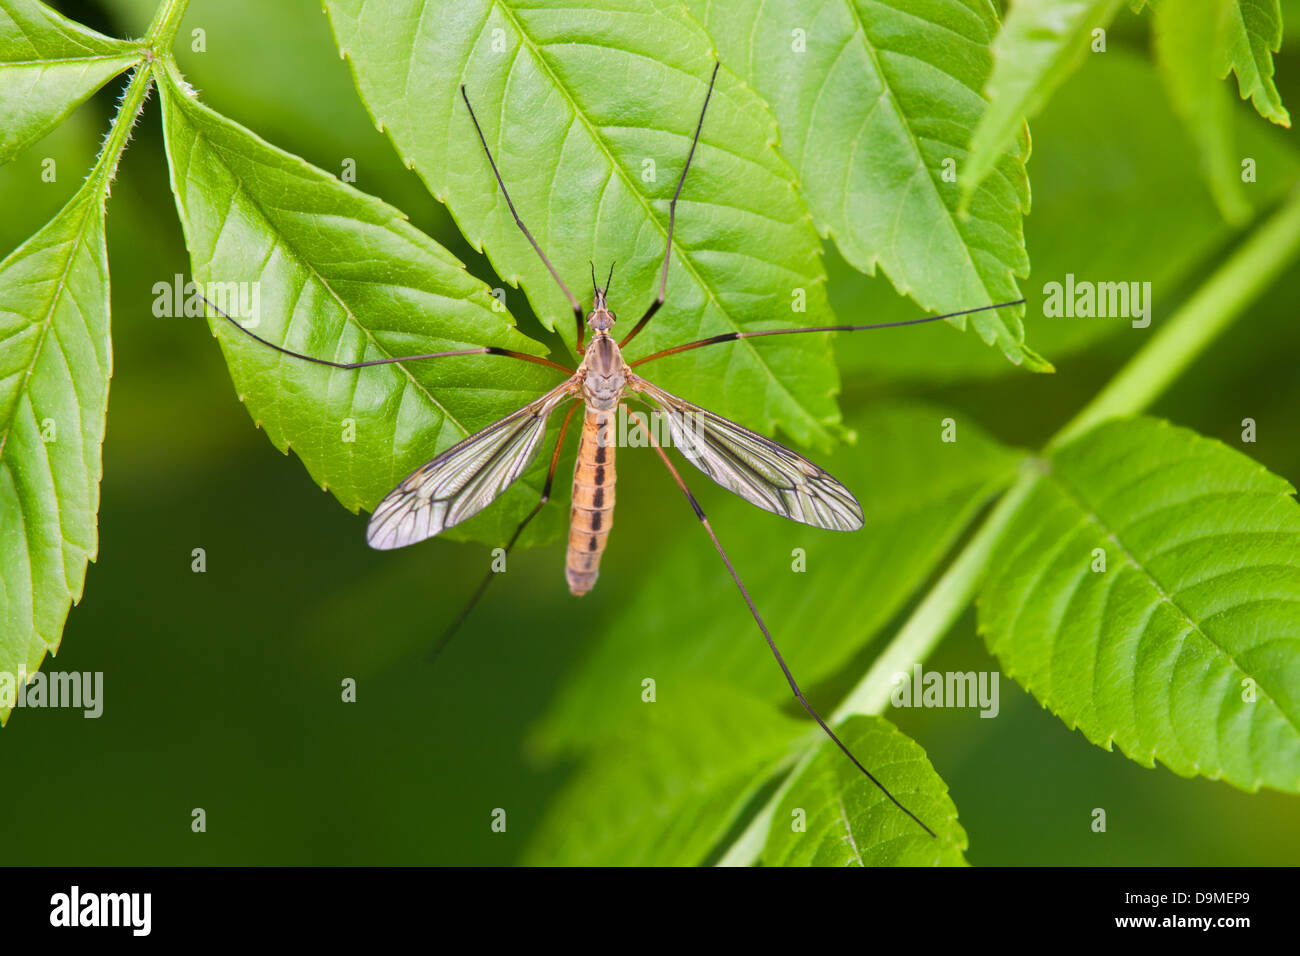 Crane-fly Tipula oleracea at adult rest on leaves Stock Photo